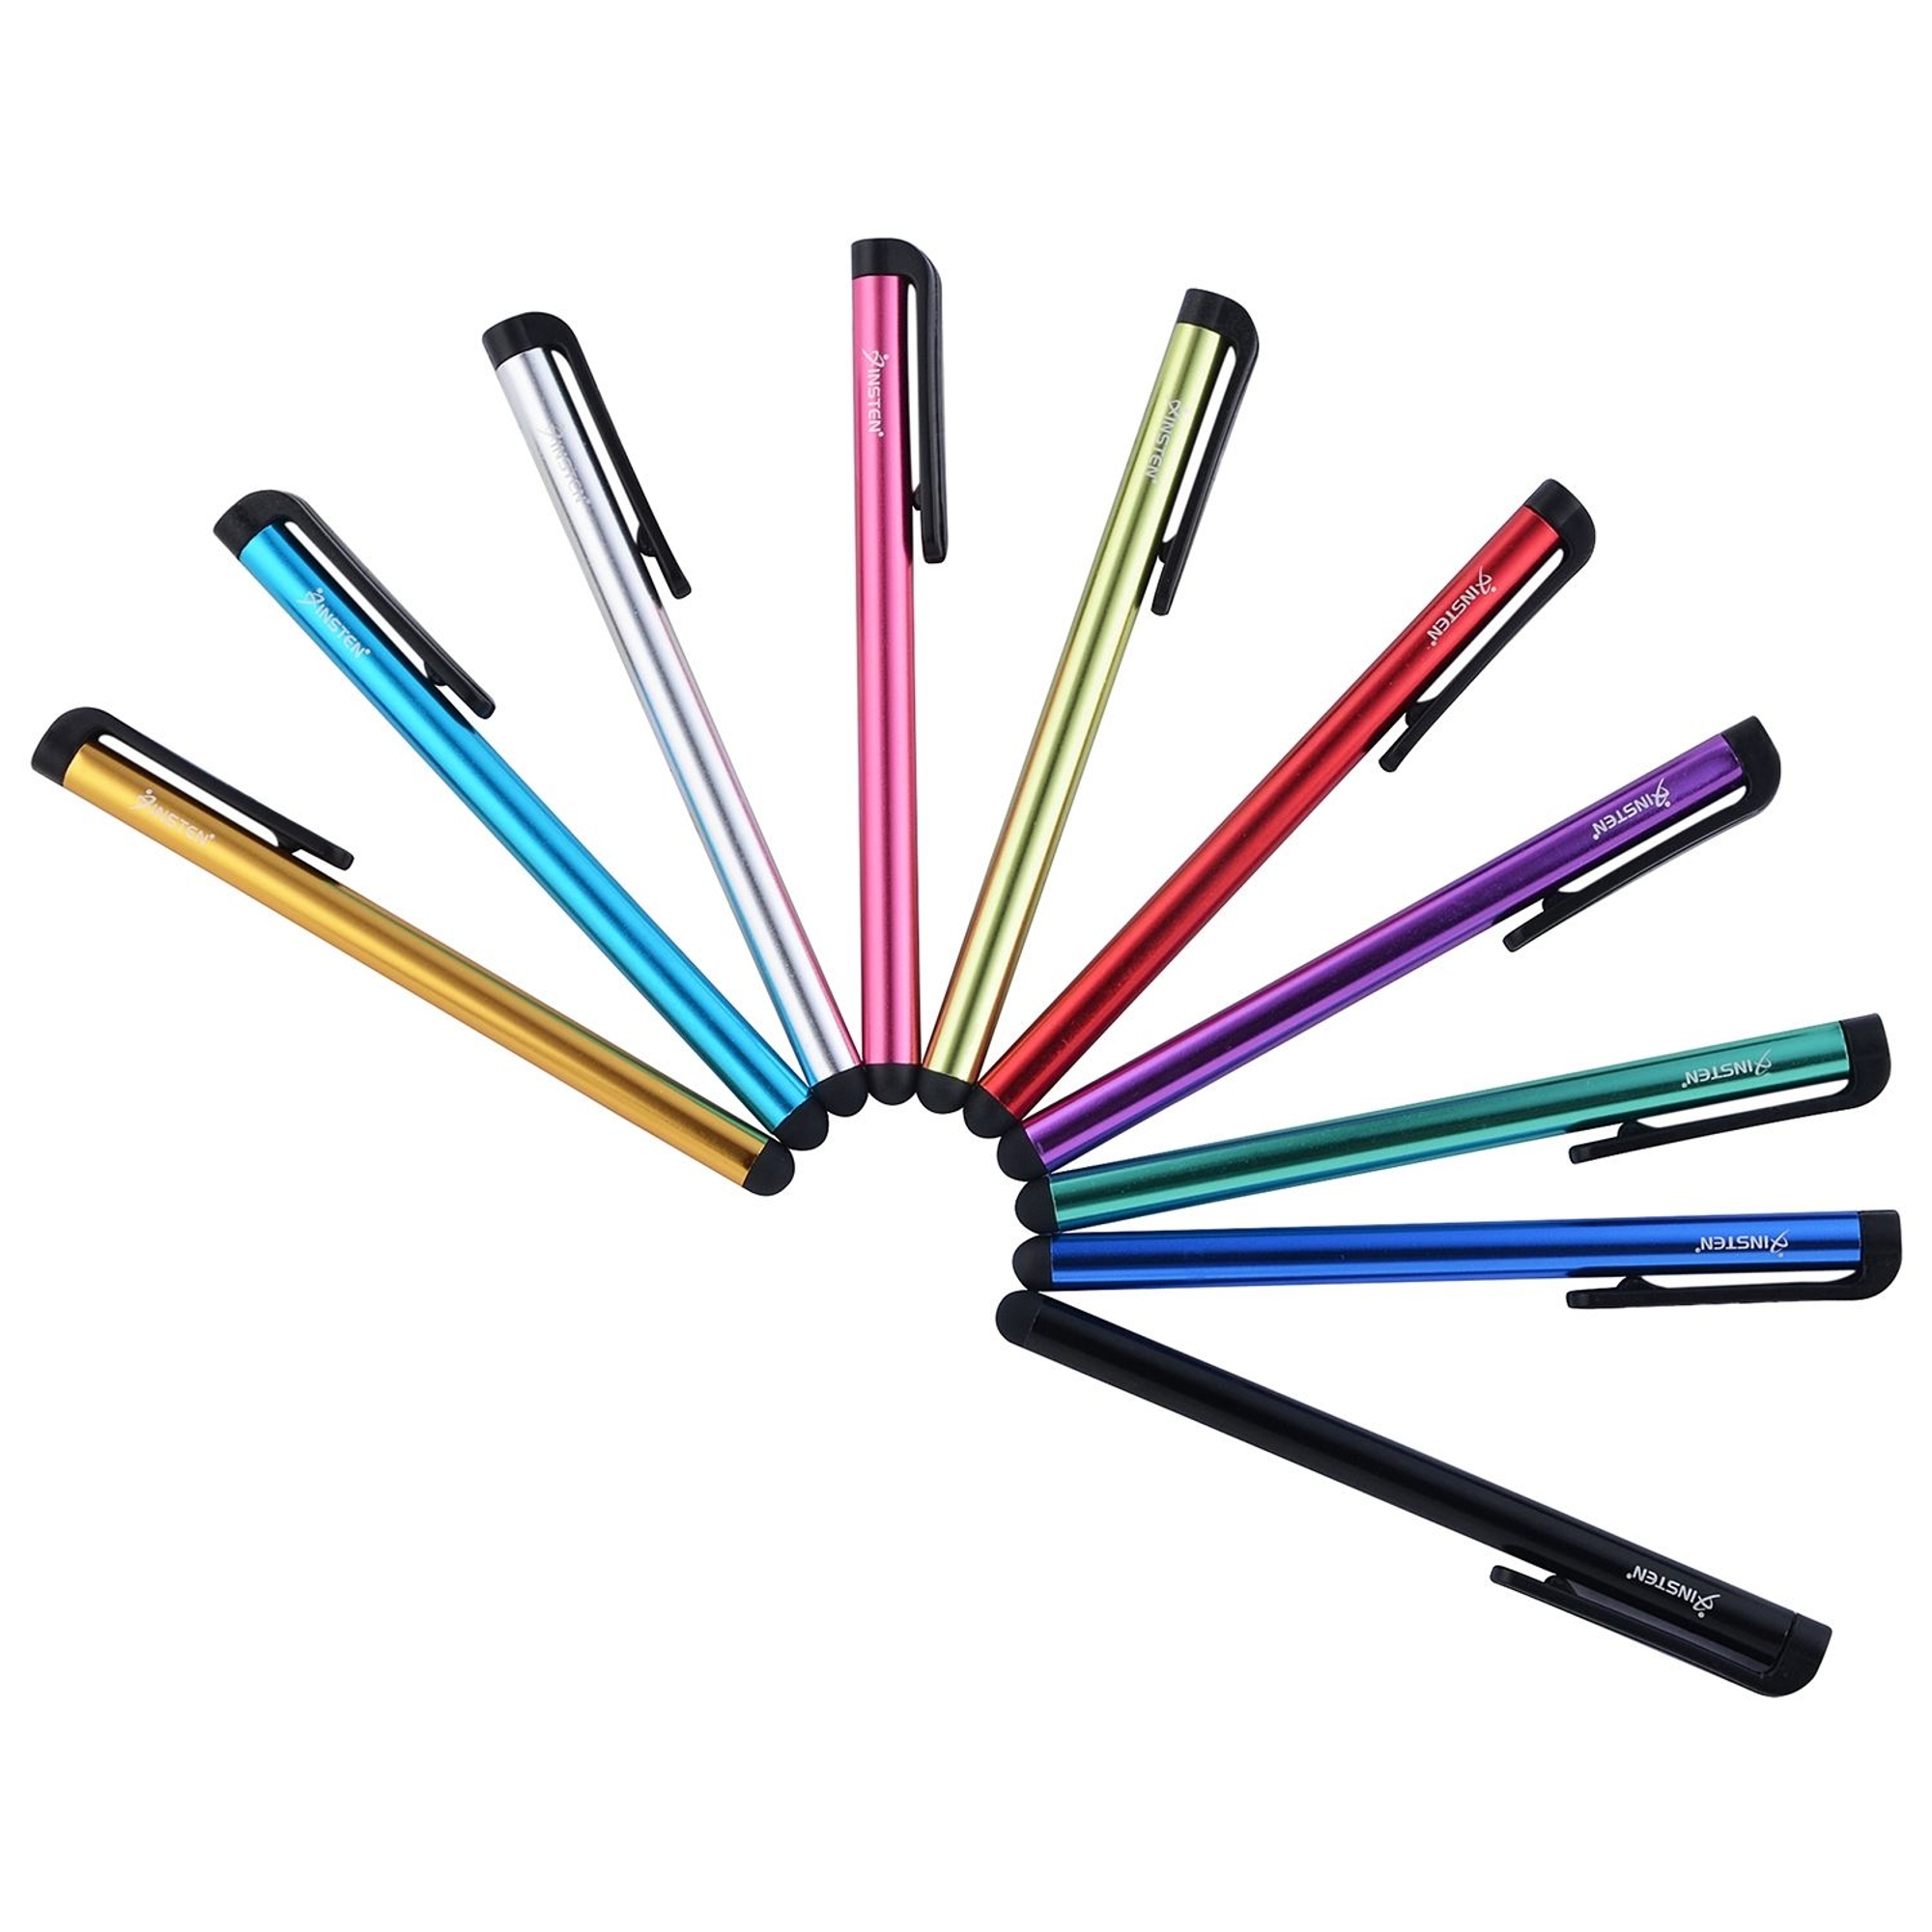 Insten 10 Pack Universal Stylus Pens for Touch Screens, Capacitive Styluses for Android Samsung Tablet Smart Phone Devices, 10 Colors - image 1 of 8